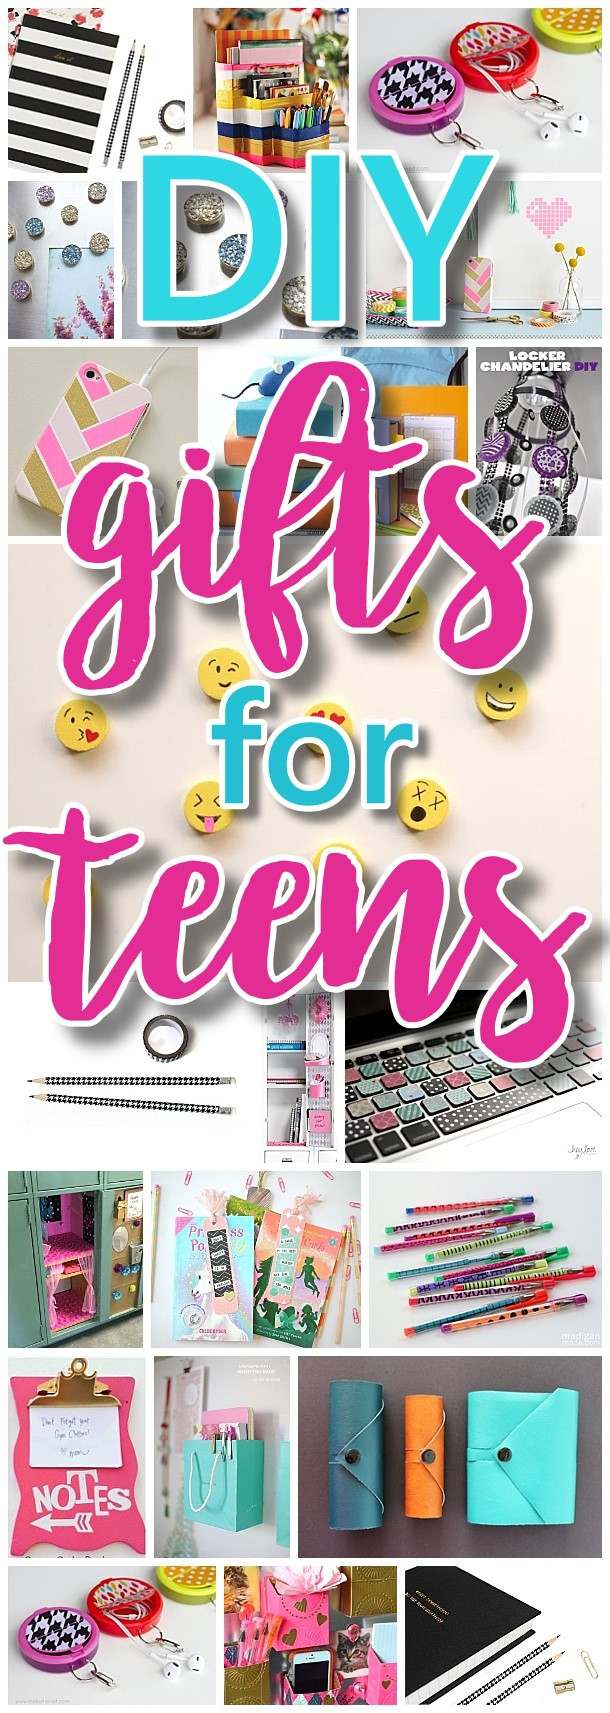 DIY Gifts For Best Friends
 The BEST DIY Gifts for Teens Tweens and Best Friends